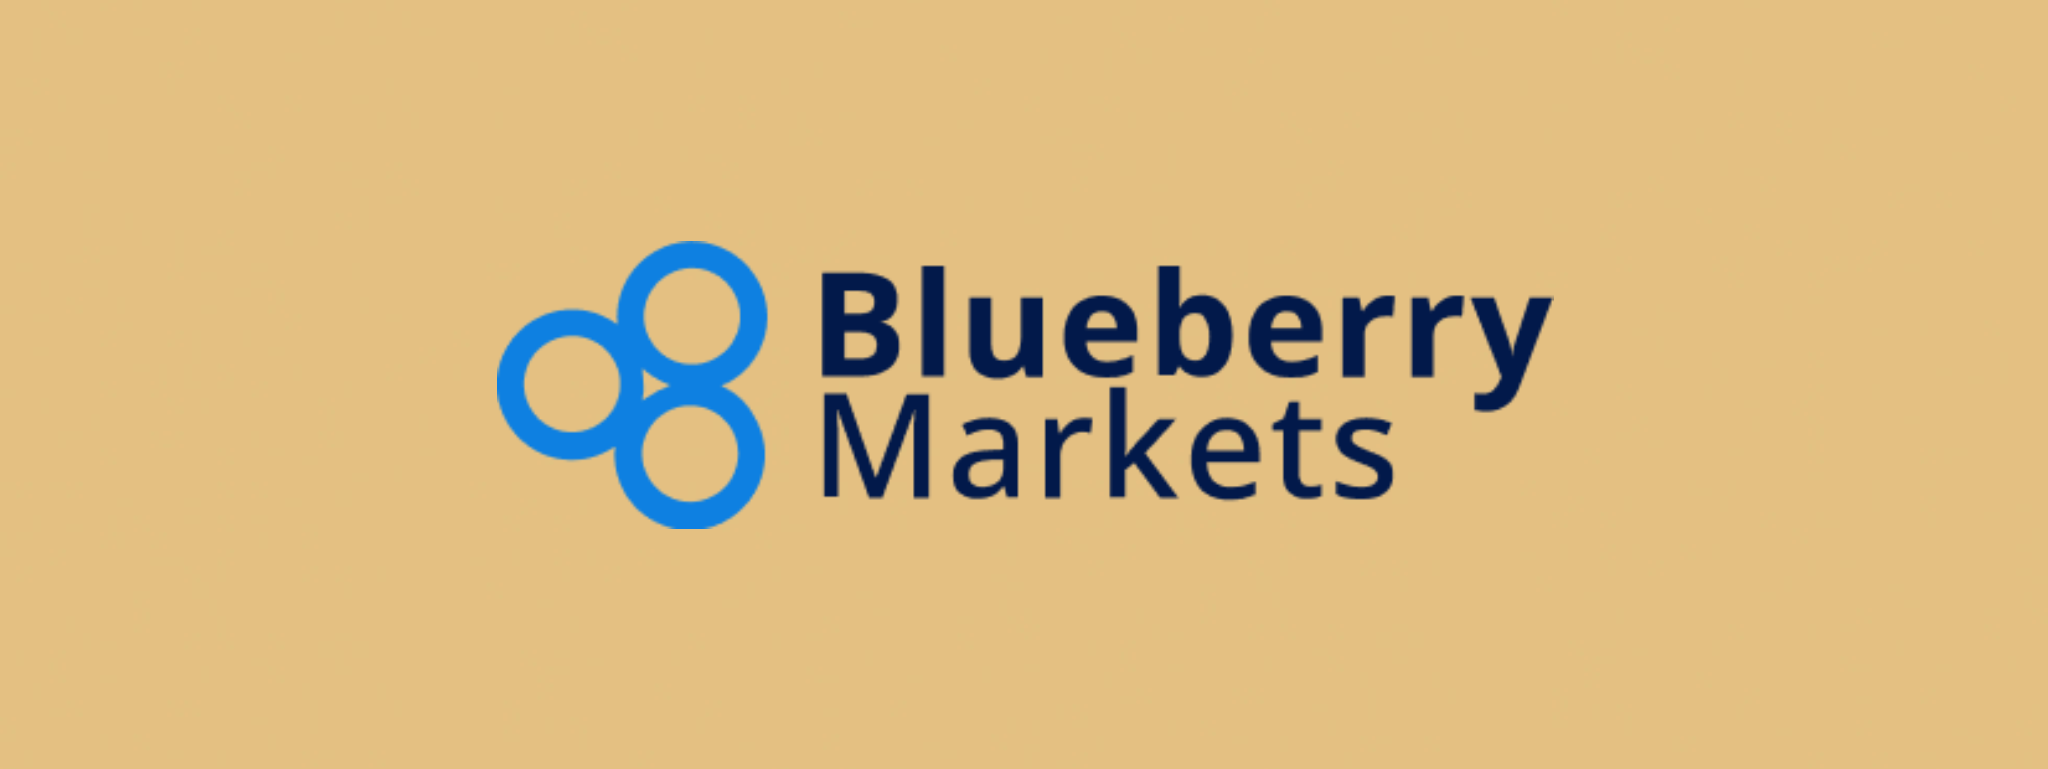 Blueberry Markets drops prop trading data and platform service after pressure from MetaQuotes over regulatory issues.